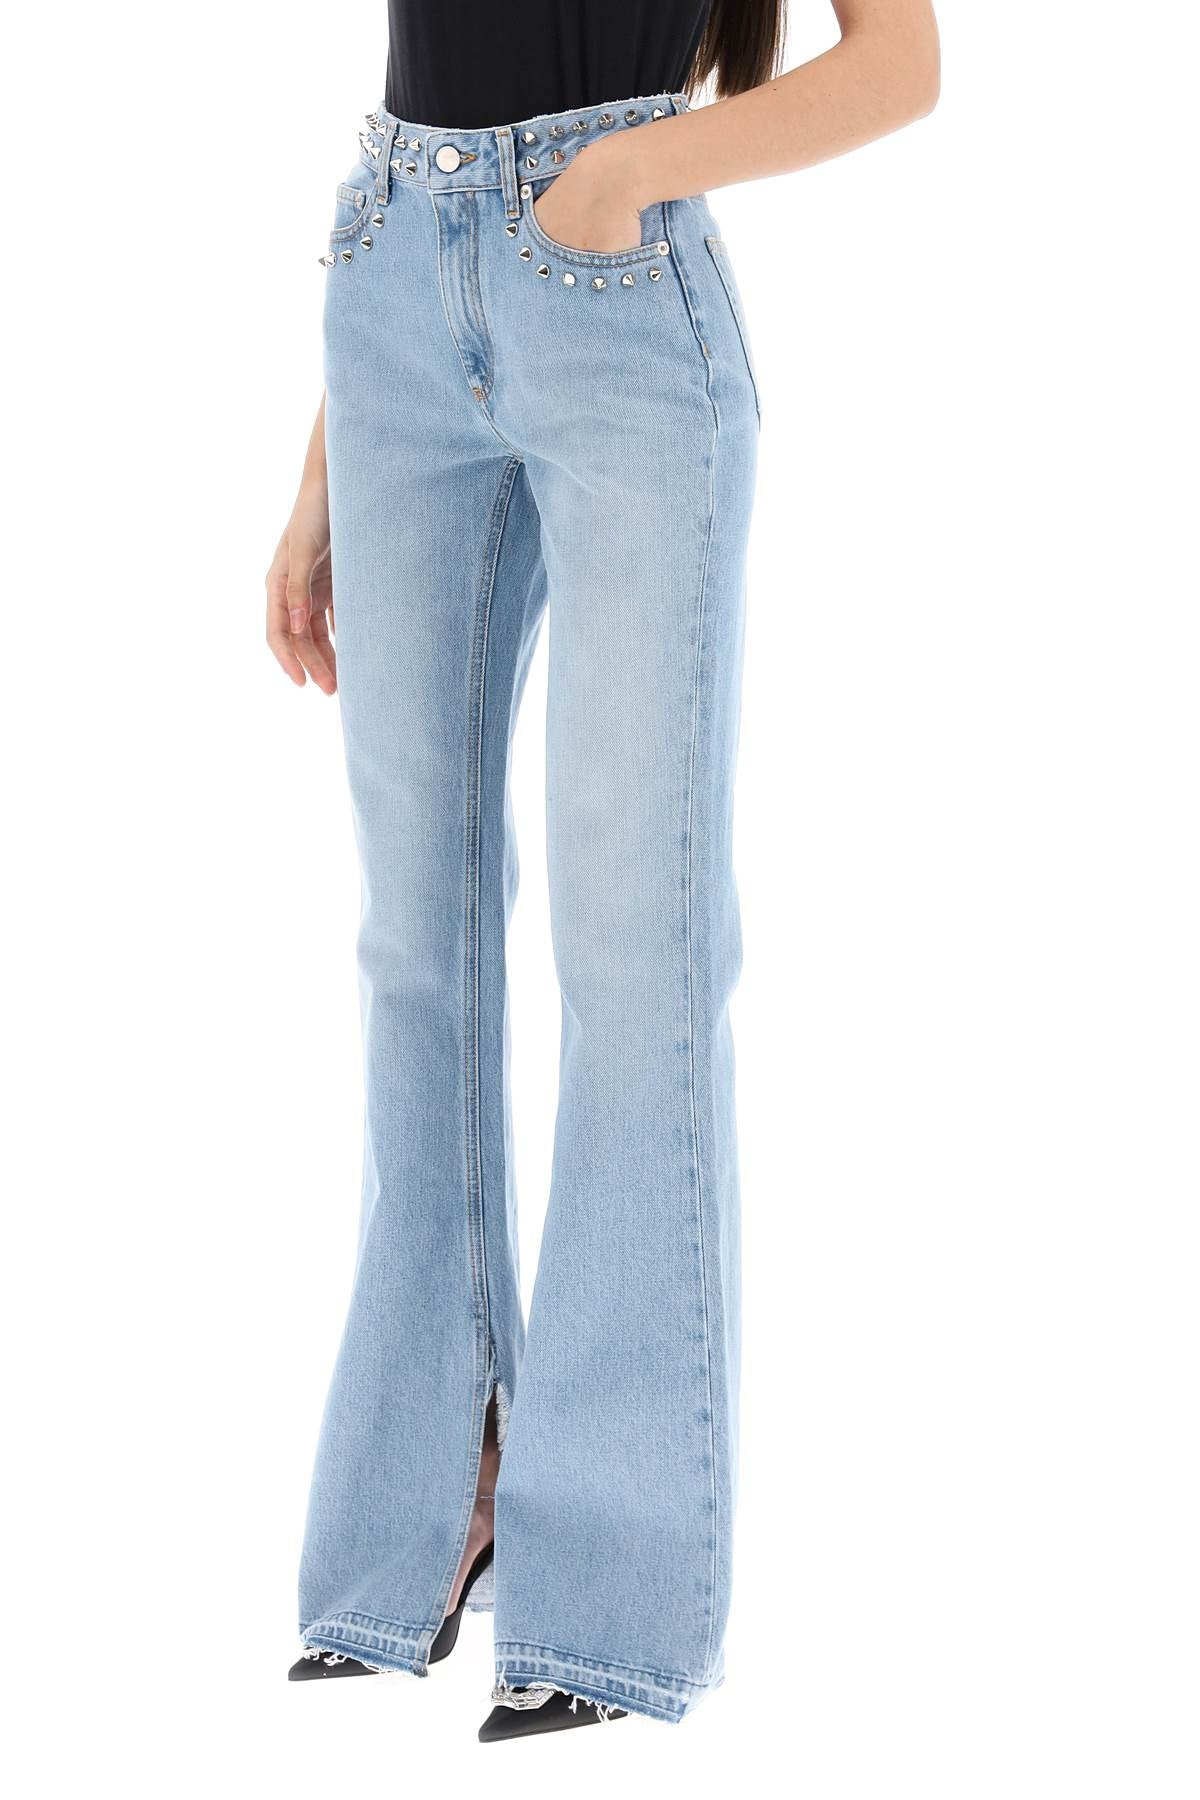 Alessandra rich flared jeans with studs-3